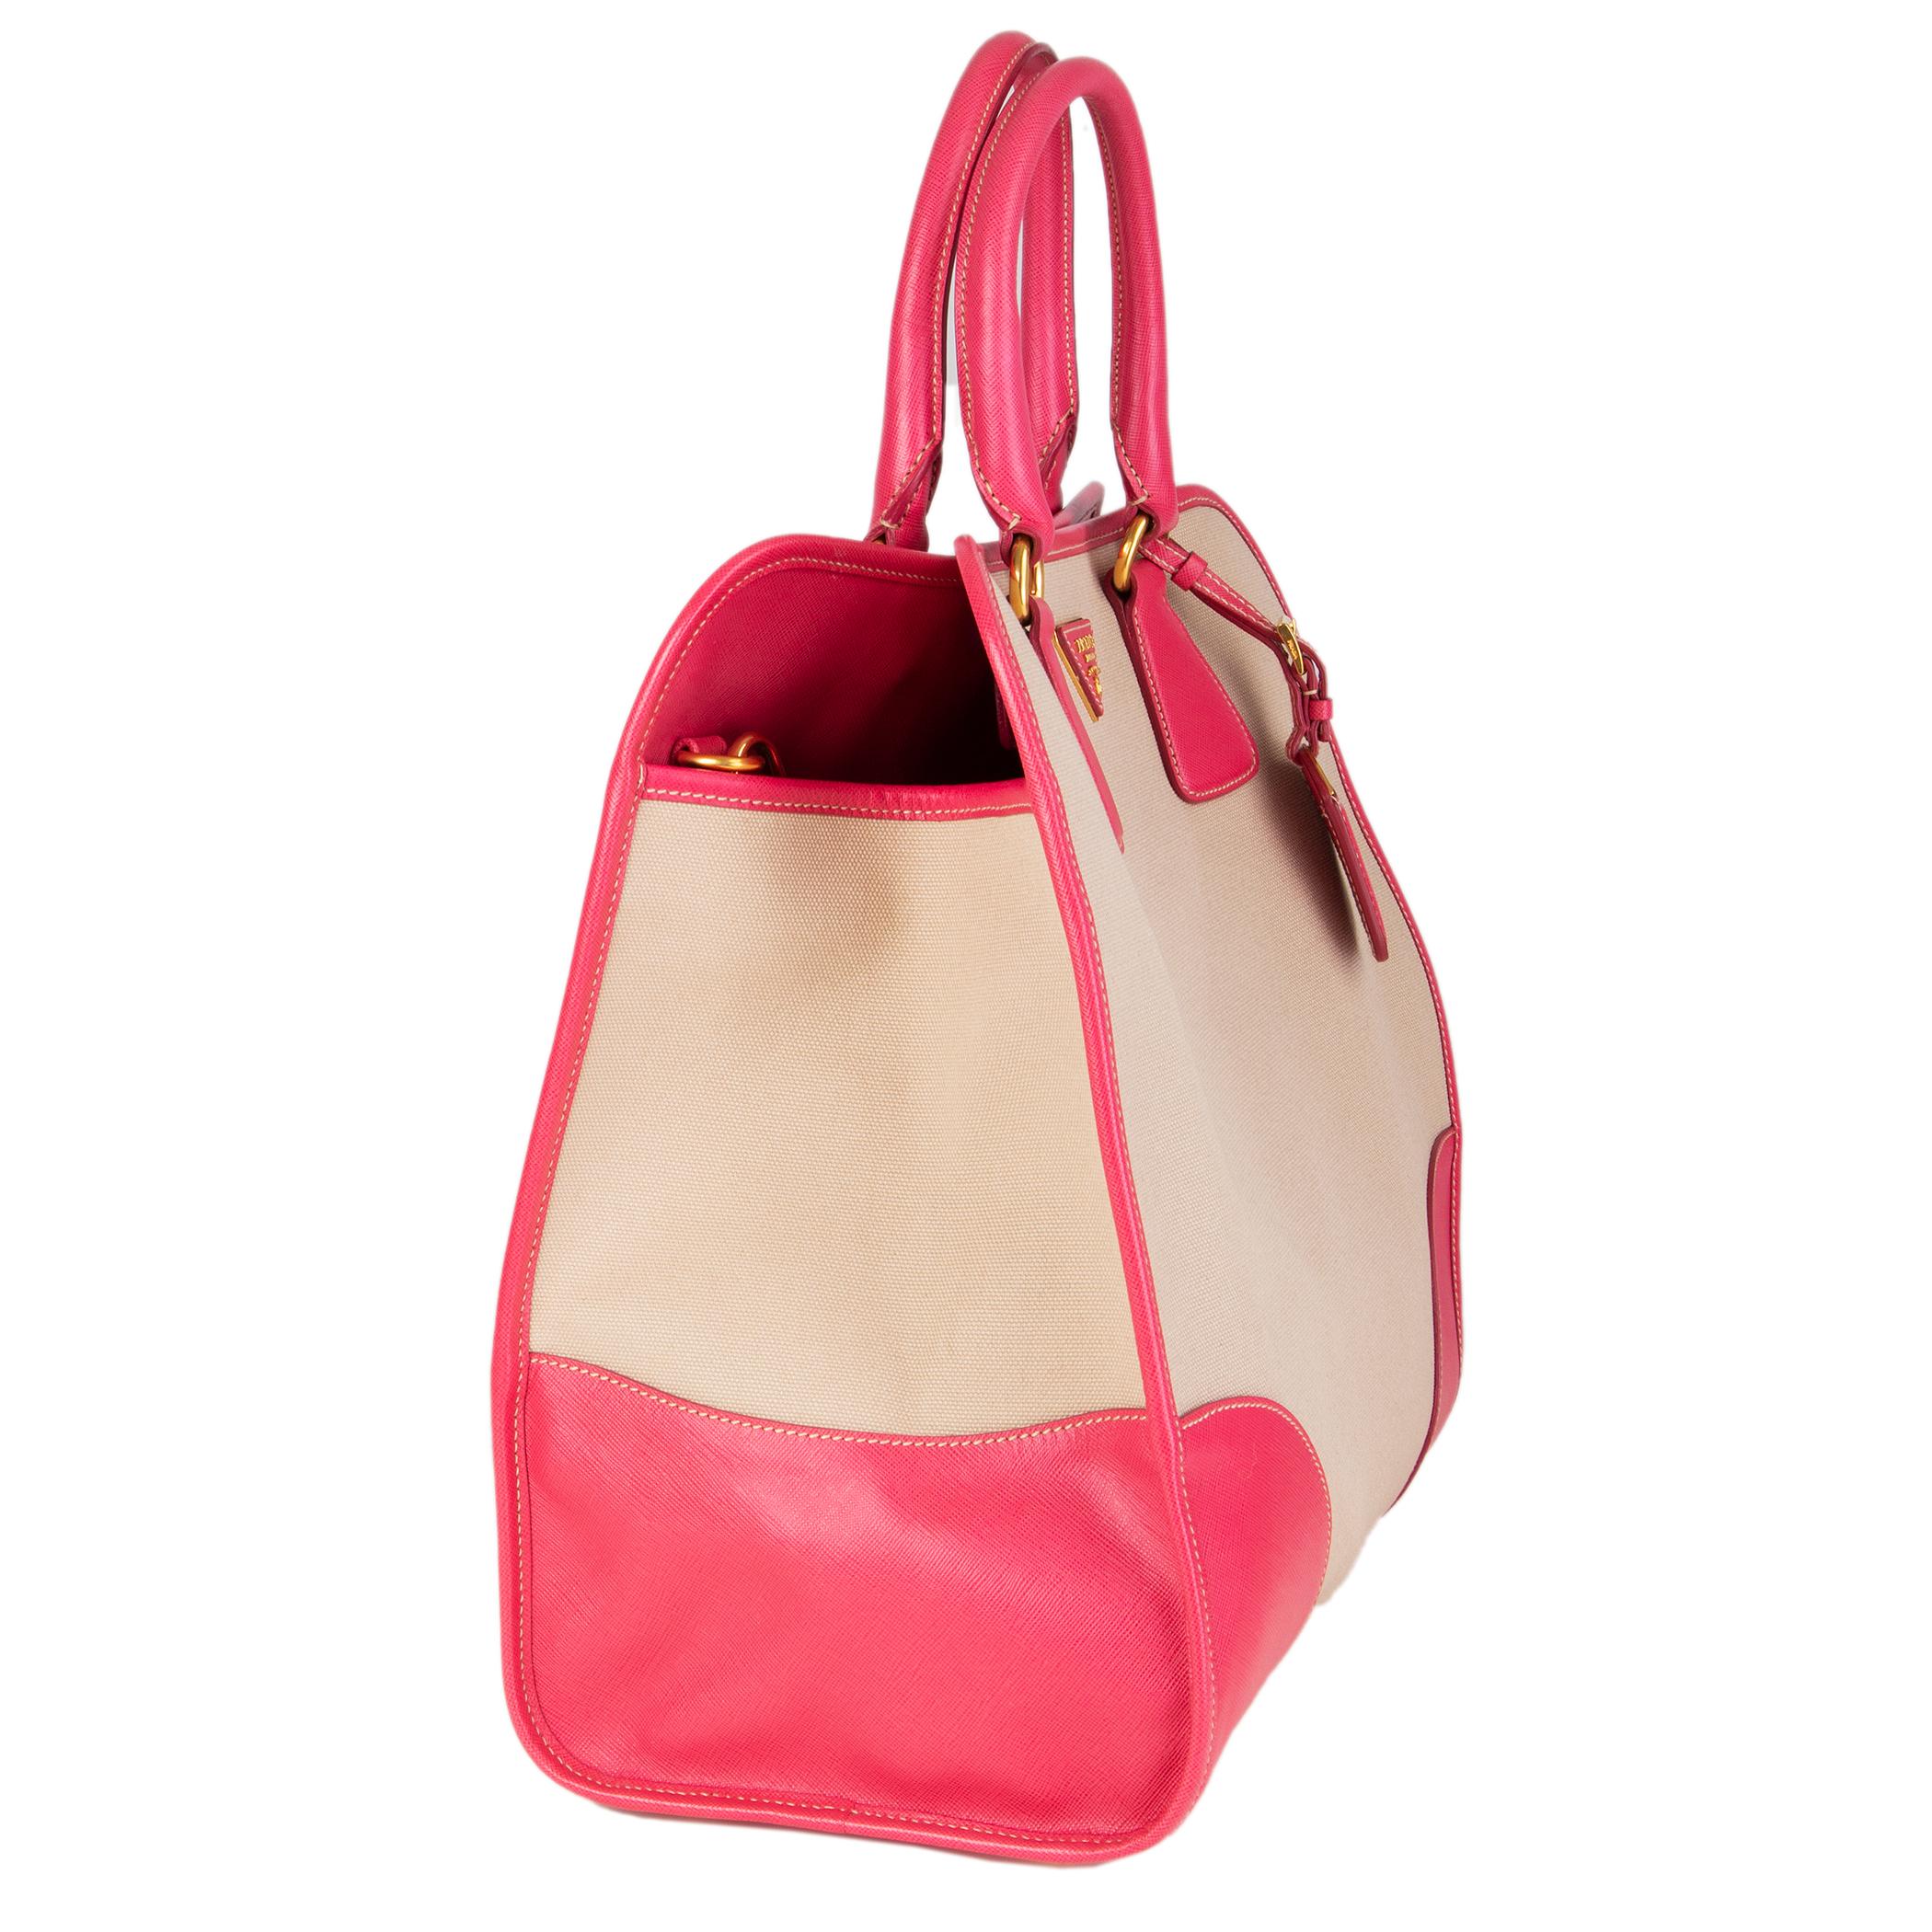 Prada framed 'North-To-South Tote Bag' in beige hemp canvas and pink Saffiano calf leather details. Opens with a snap button on top. Lined in pink classic Prada nylon lining with one zipper pocket against the back and front with two attached open